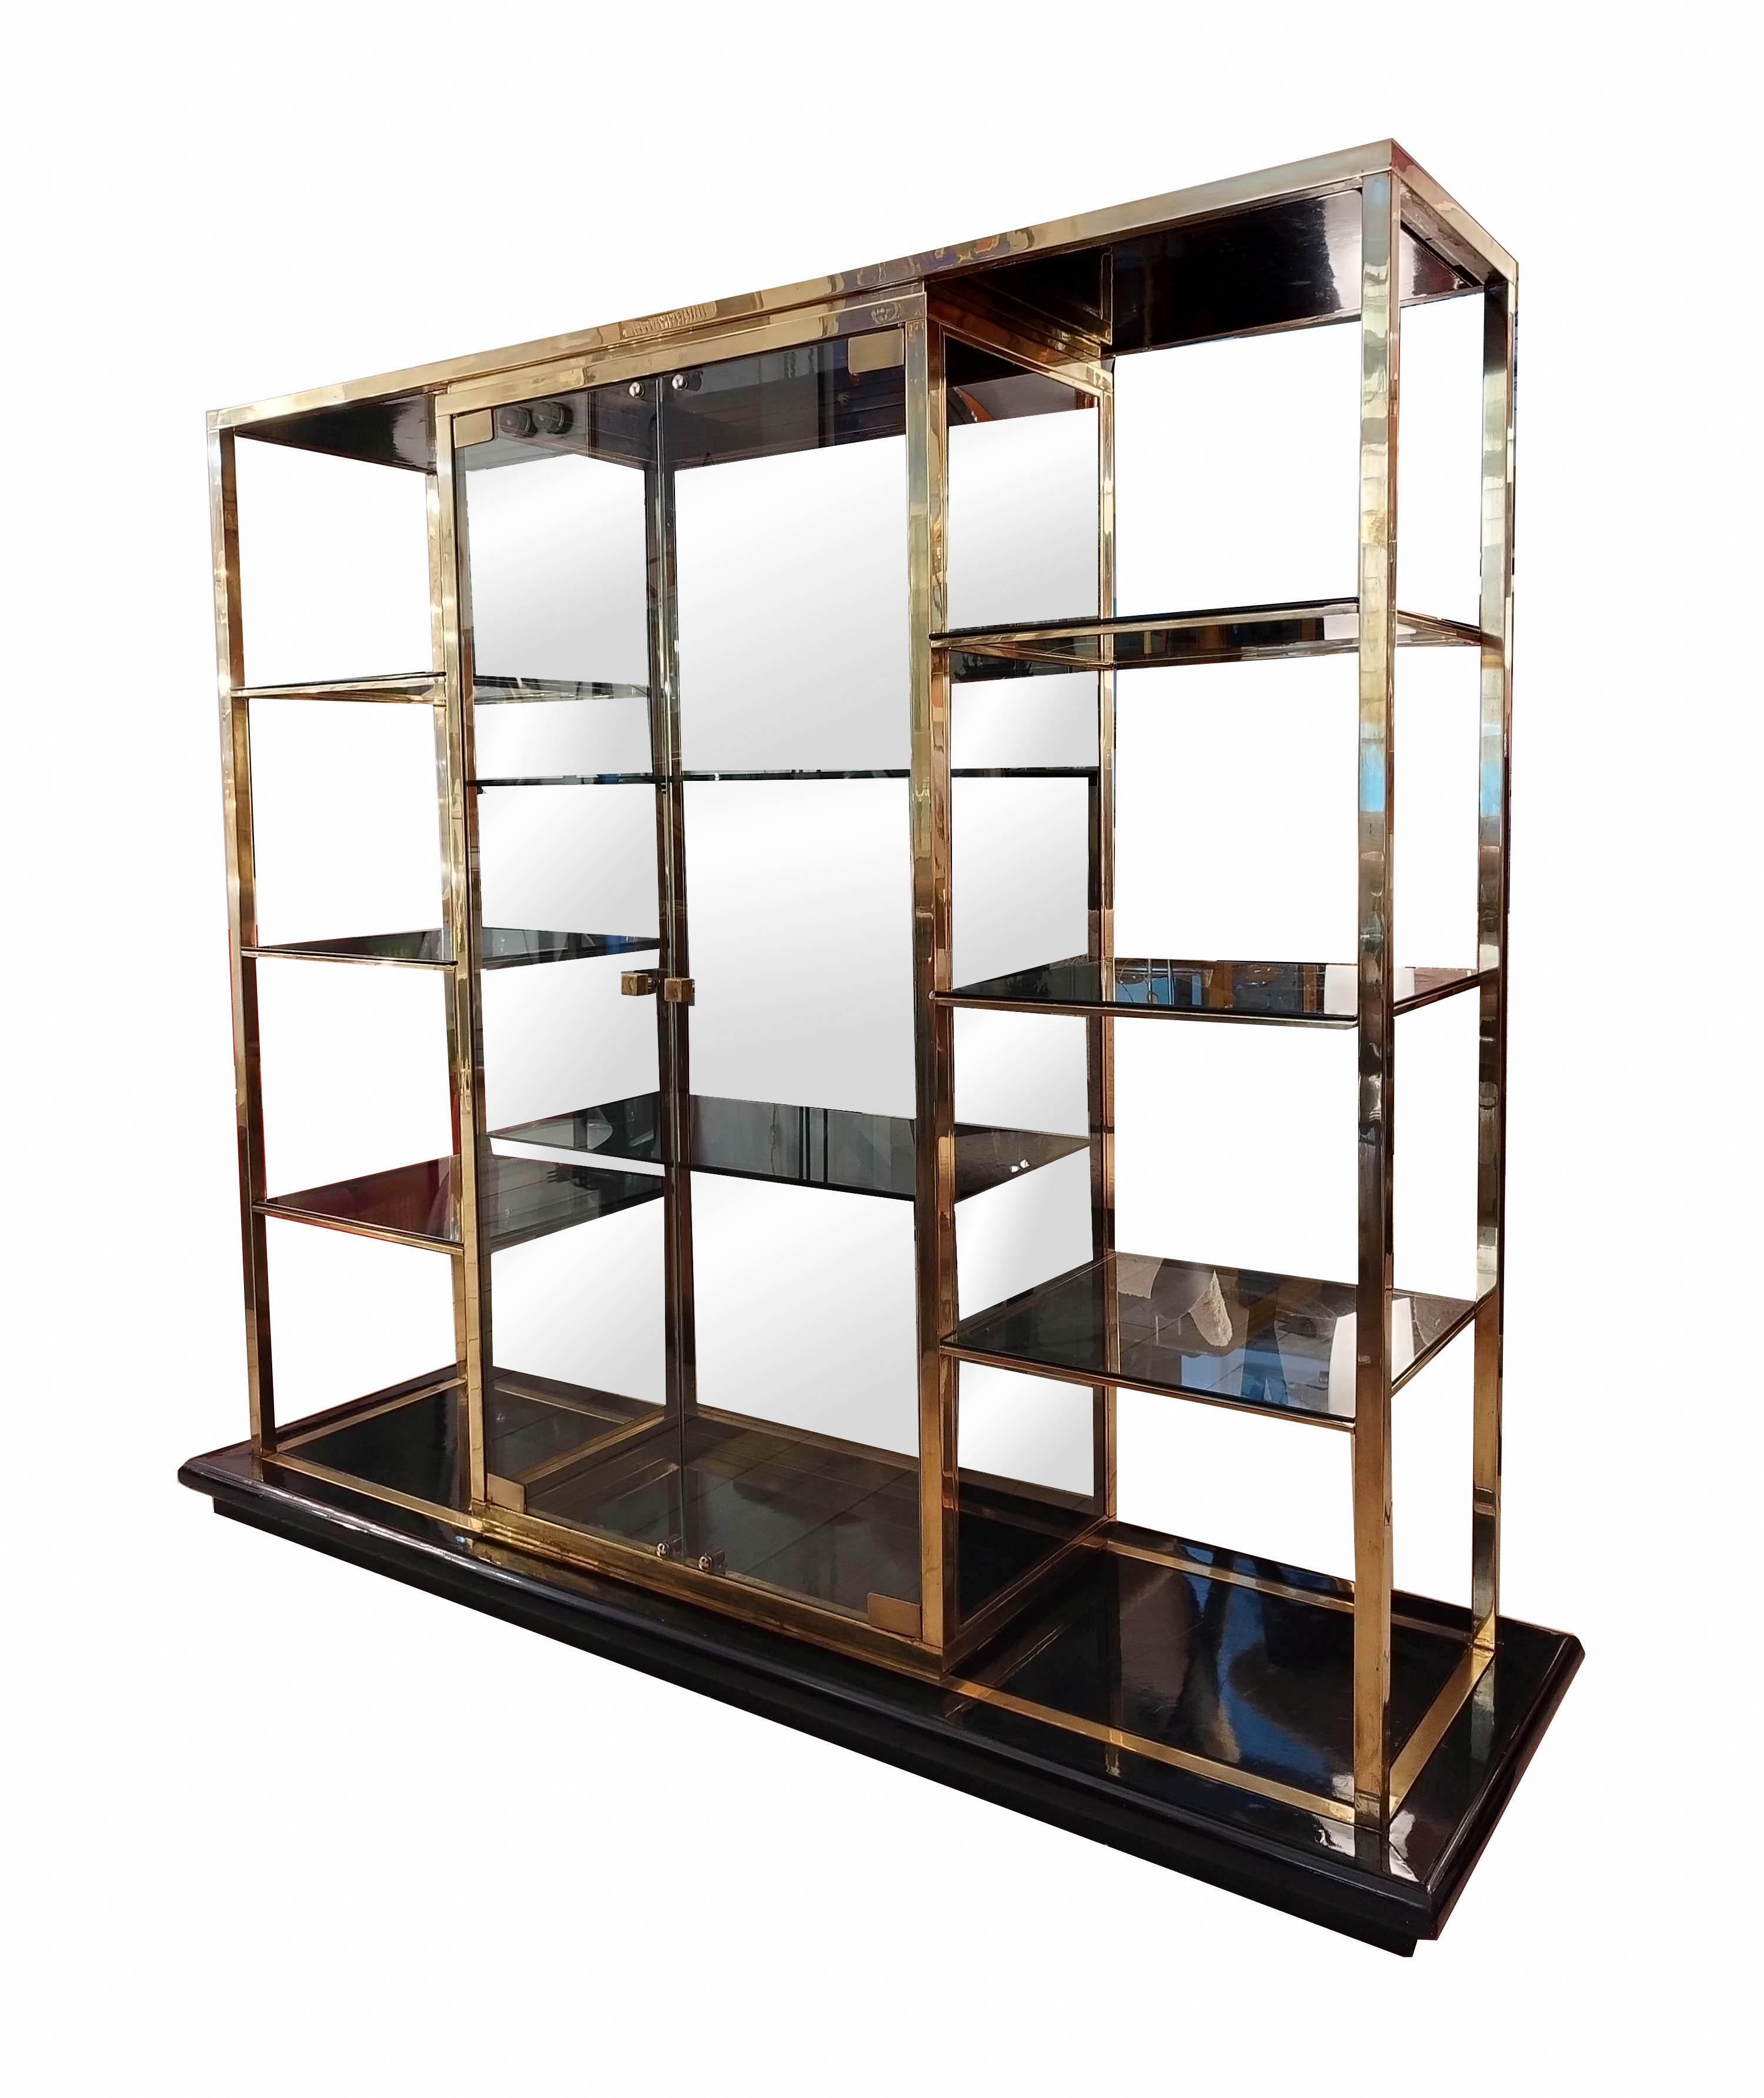 Etagere, display case, bookcase, made of brass on a black lacquered wooden base, the etagere consists of a central two-door display case with brass handles, 6 glass shelves' fume, the lower and upper bases are made of black lacquered wood This piece